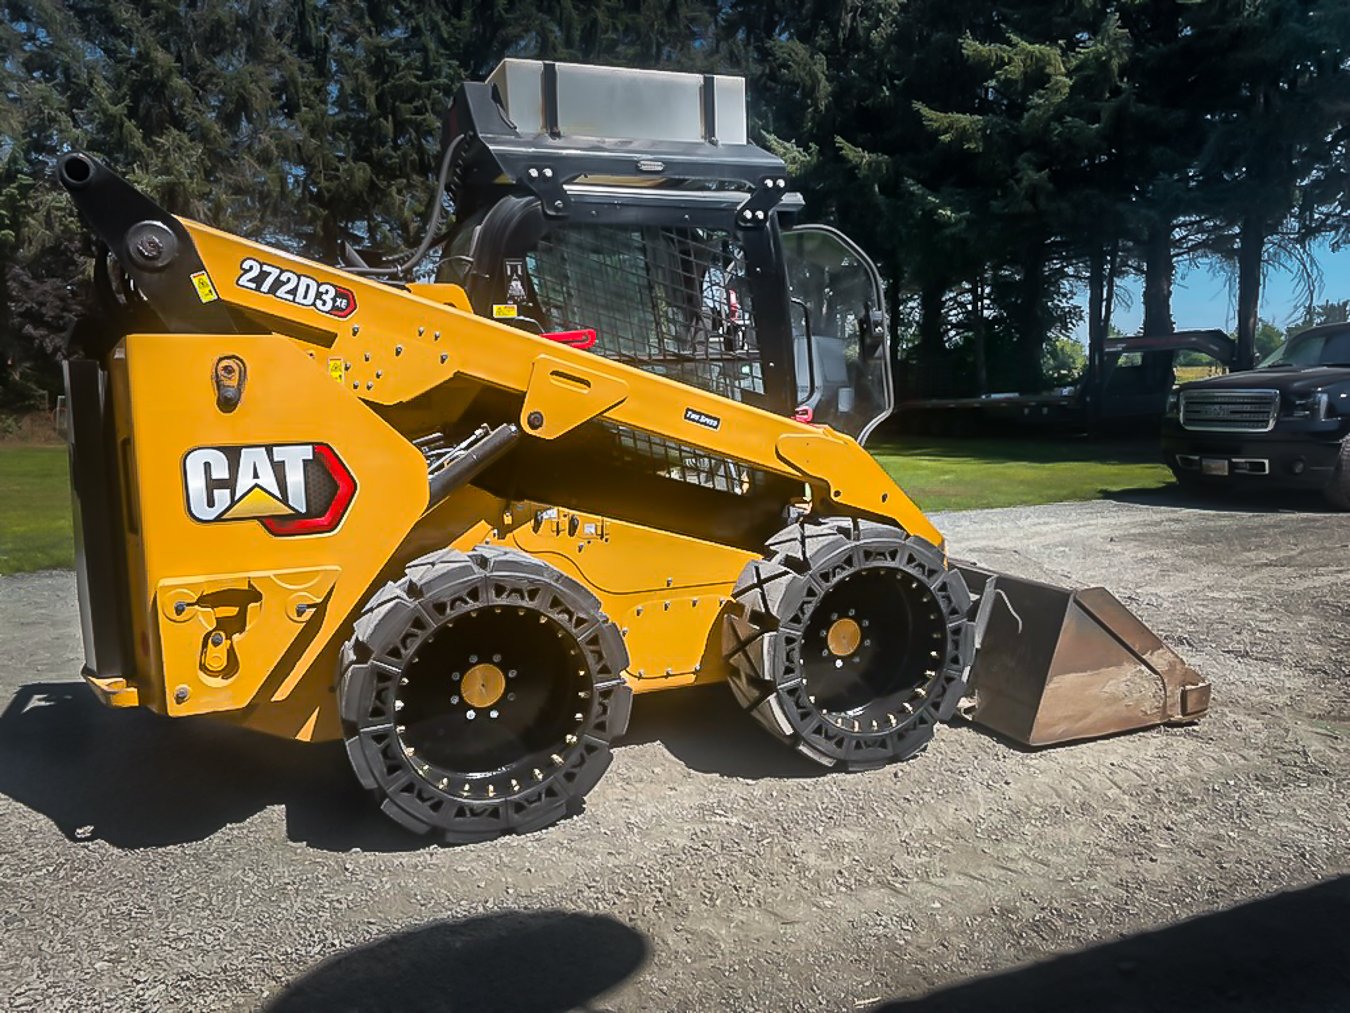 This images shows a CAT 272D3 HS with our EWRS HS 14x17.5 Solid Skid Steer Tires